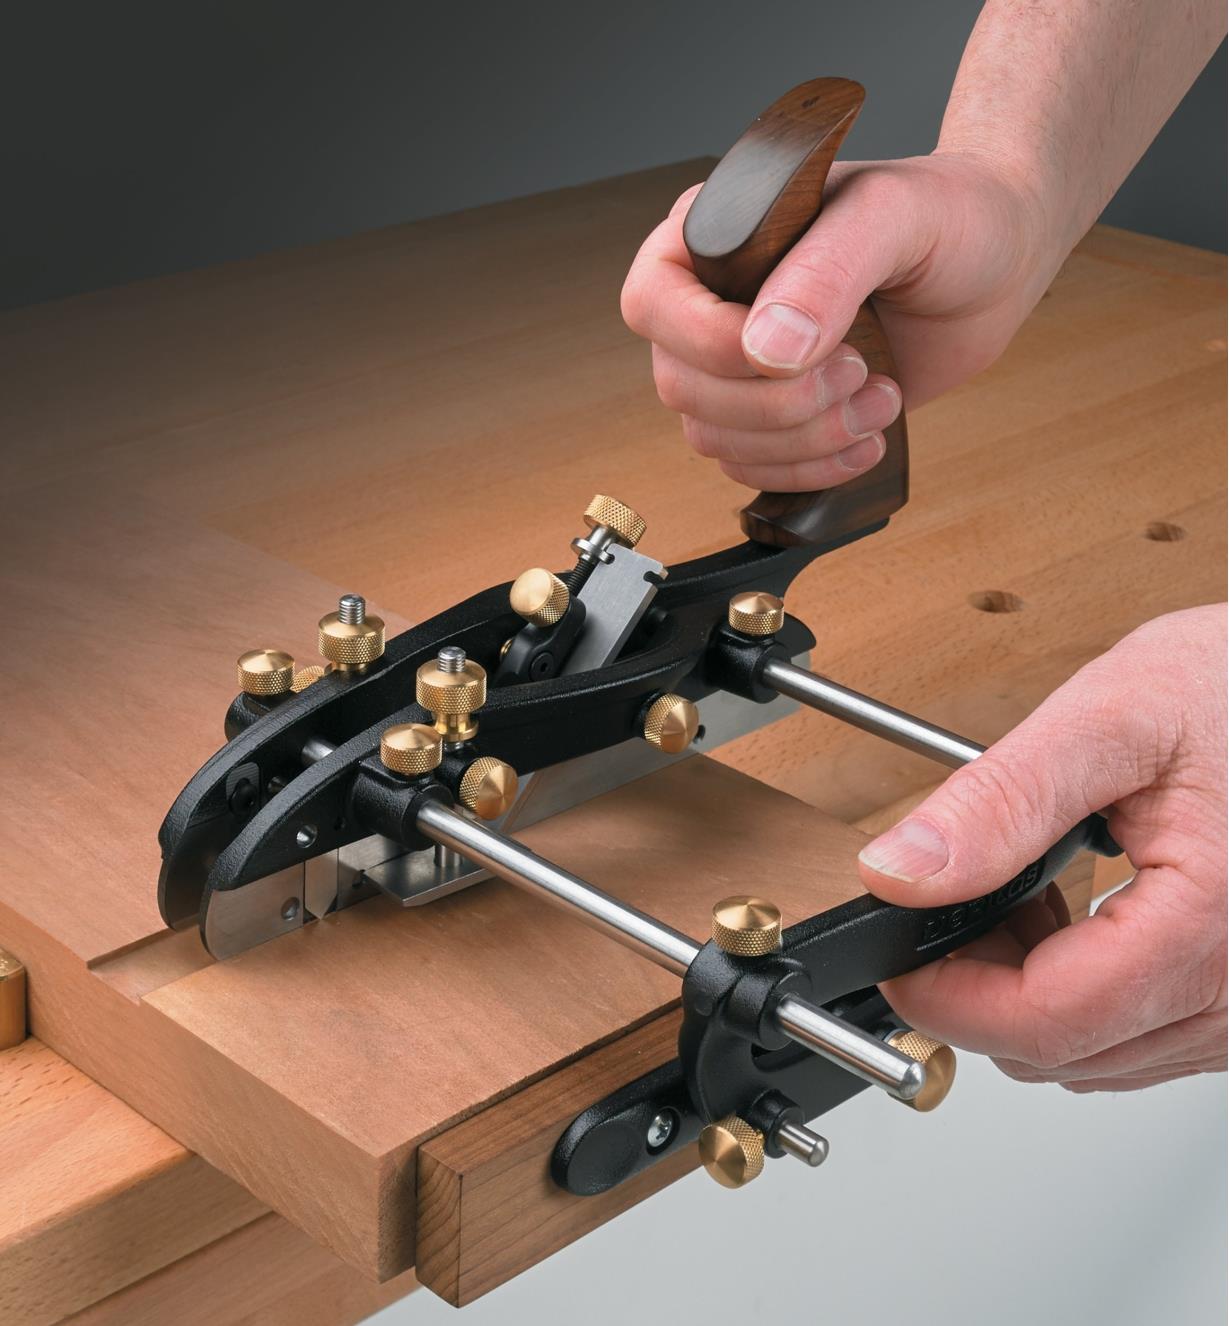 Using the combination plane and fence to cut a dado across a board